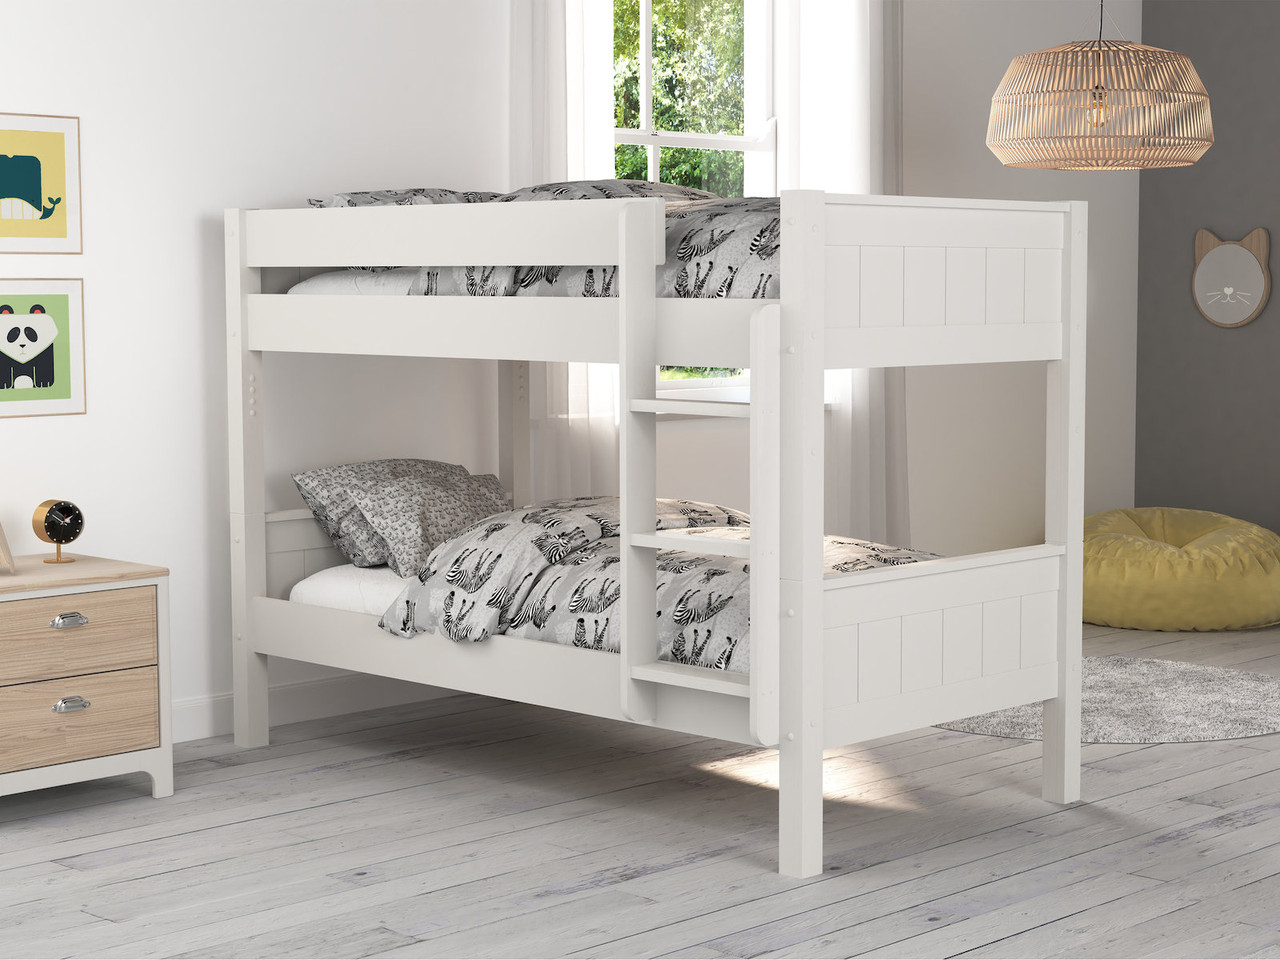 Stompa Meadow Compact Bunk Bed